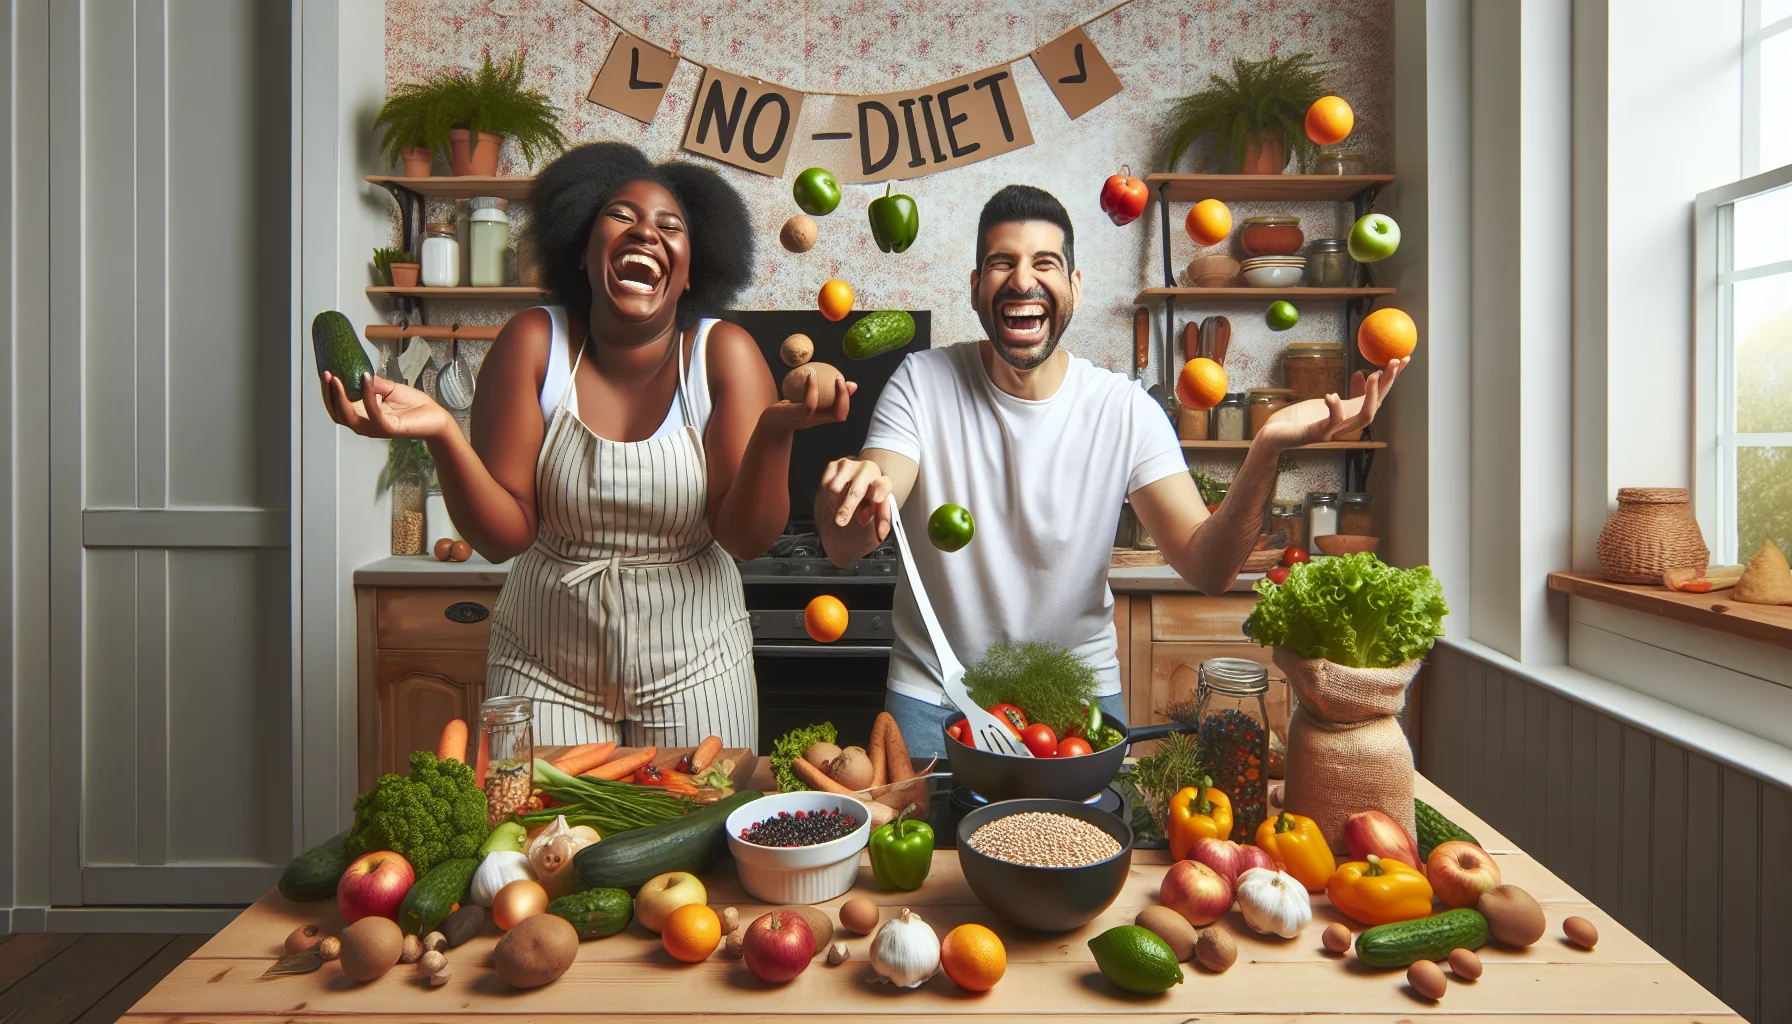 A humorous scene displaying the No-Diet Approach to Eating. Two friends, a Black woman and a Hispanic man, are cooking healthy meals in the kitchen. They are laughing while juggling different colored fruits and vegetables. Around them, various fresh produce, herbs, grains are scattered, with price tags attached that are visibly lower than typical fast food prices. The room is filled with a palpable sense of joy and well-being, all the while showcasing the affordability of making healthy food choices.